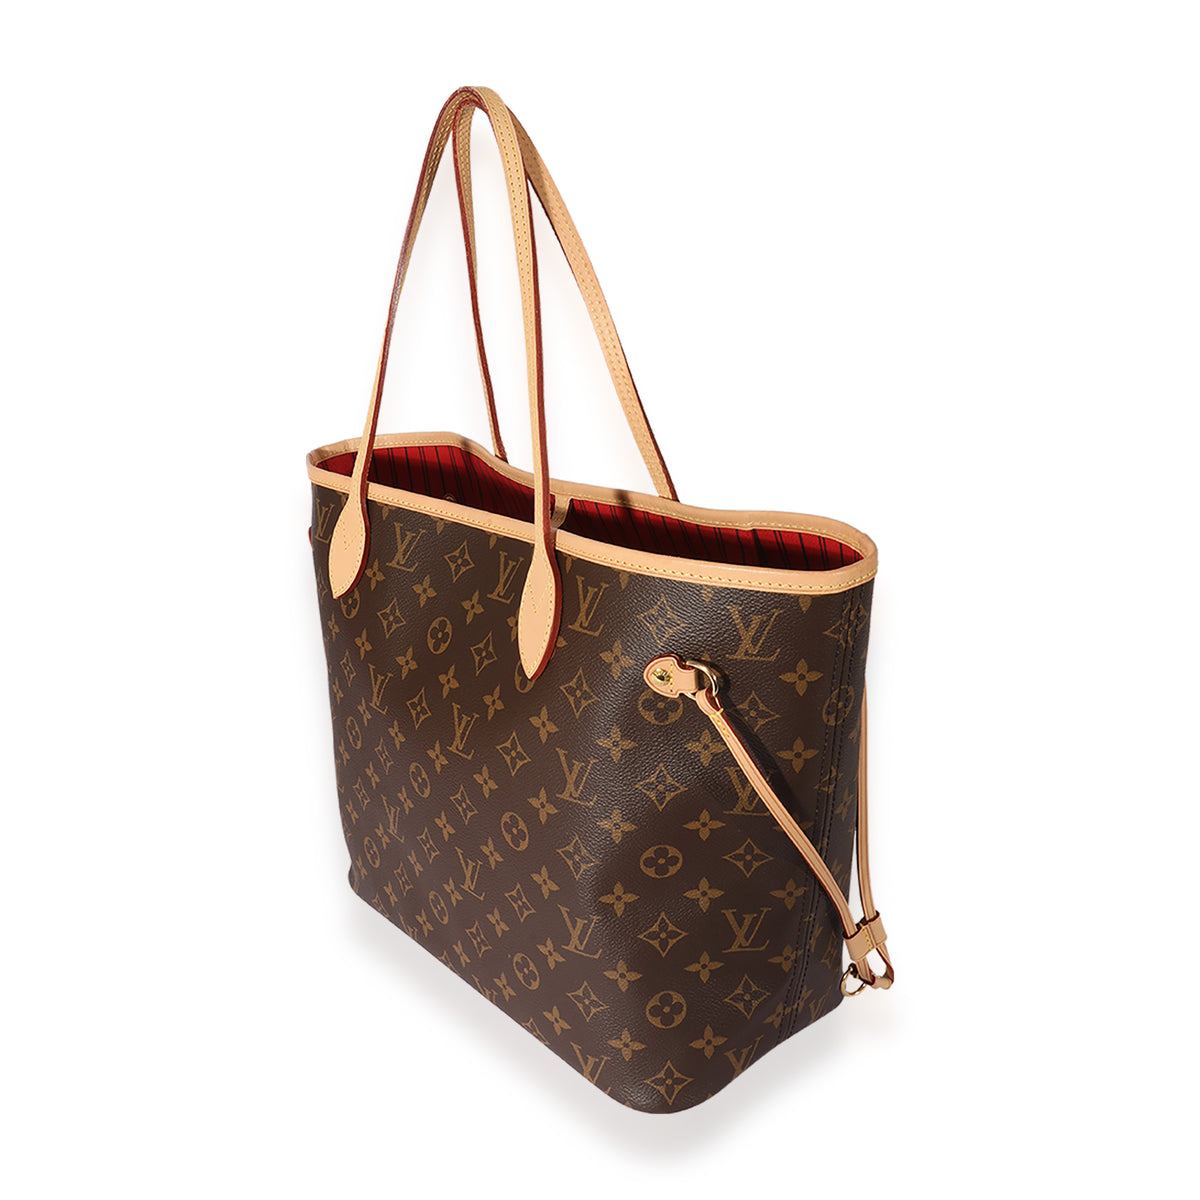 My 1st LV bag! It was b/w Neverfull MM or Onthego MM in black